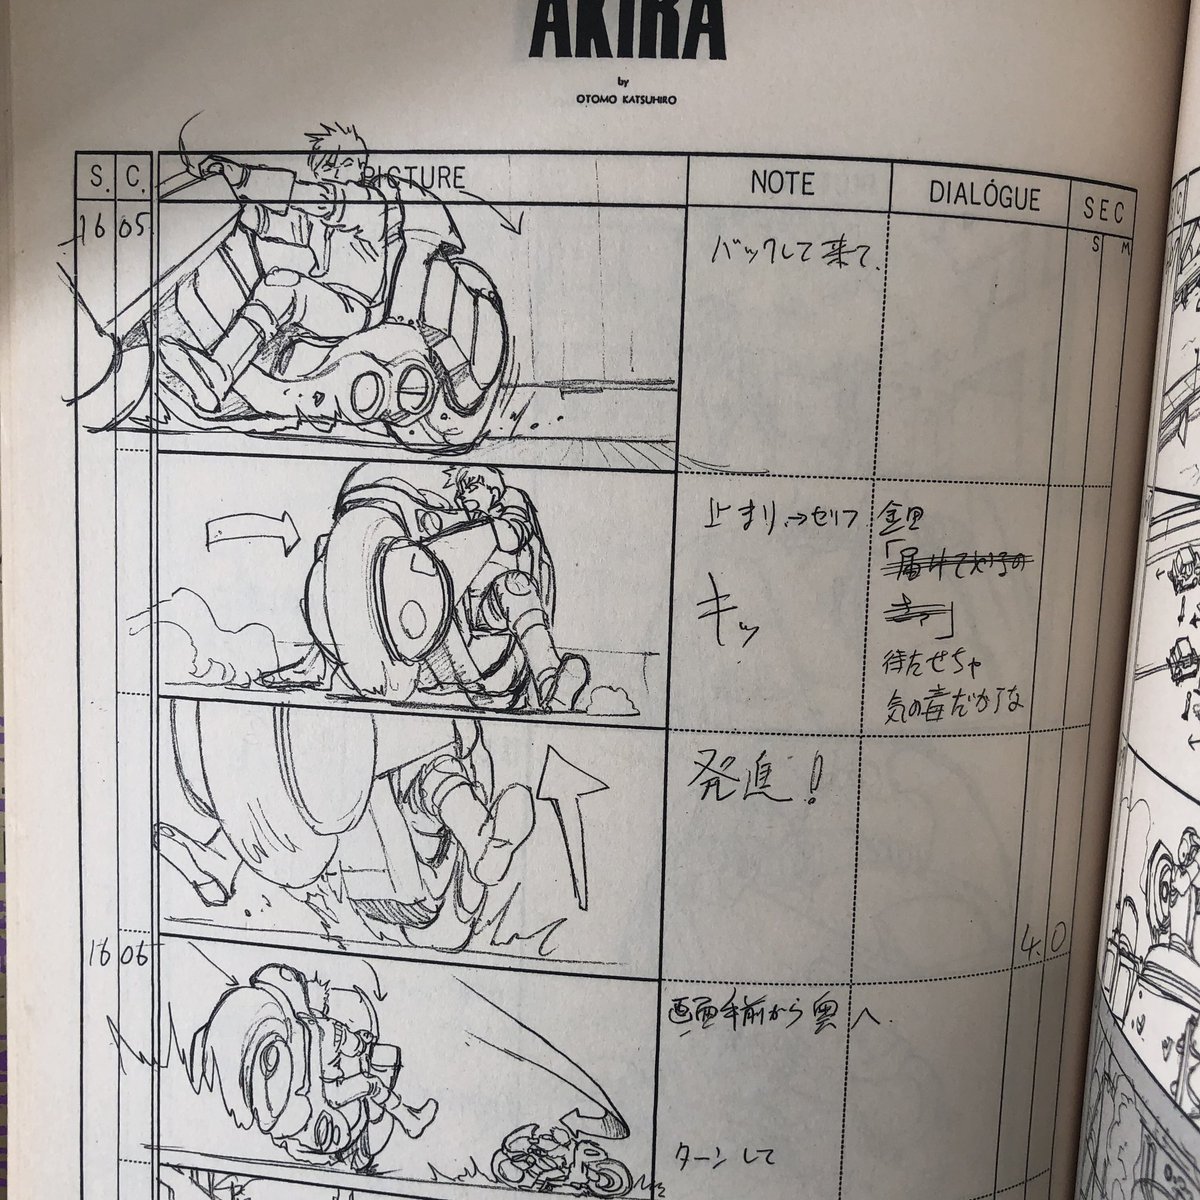 The Continuity of Akira, 1 & 2. Released in 1988, it is probably the largest storyboard version of the movie out there